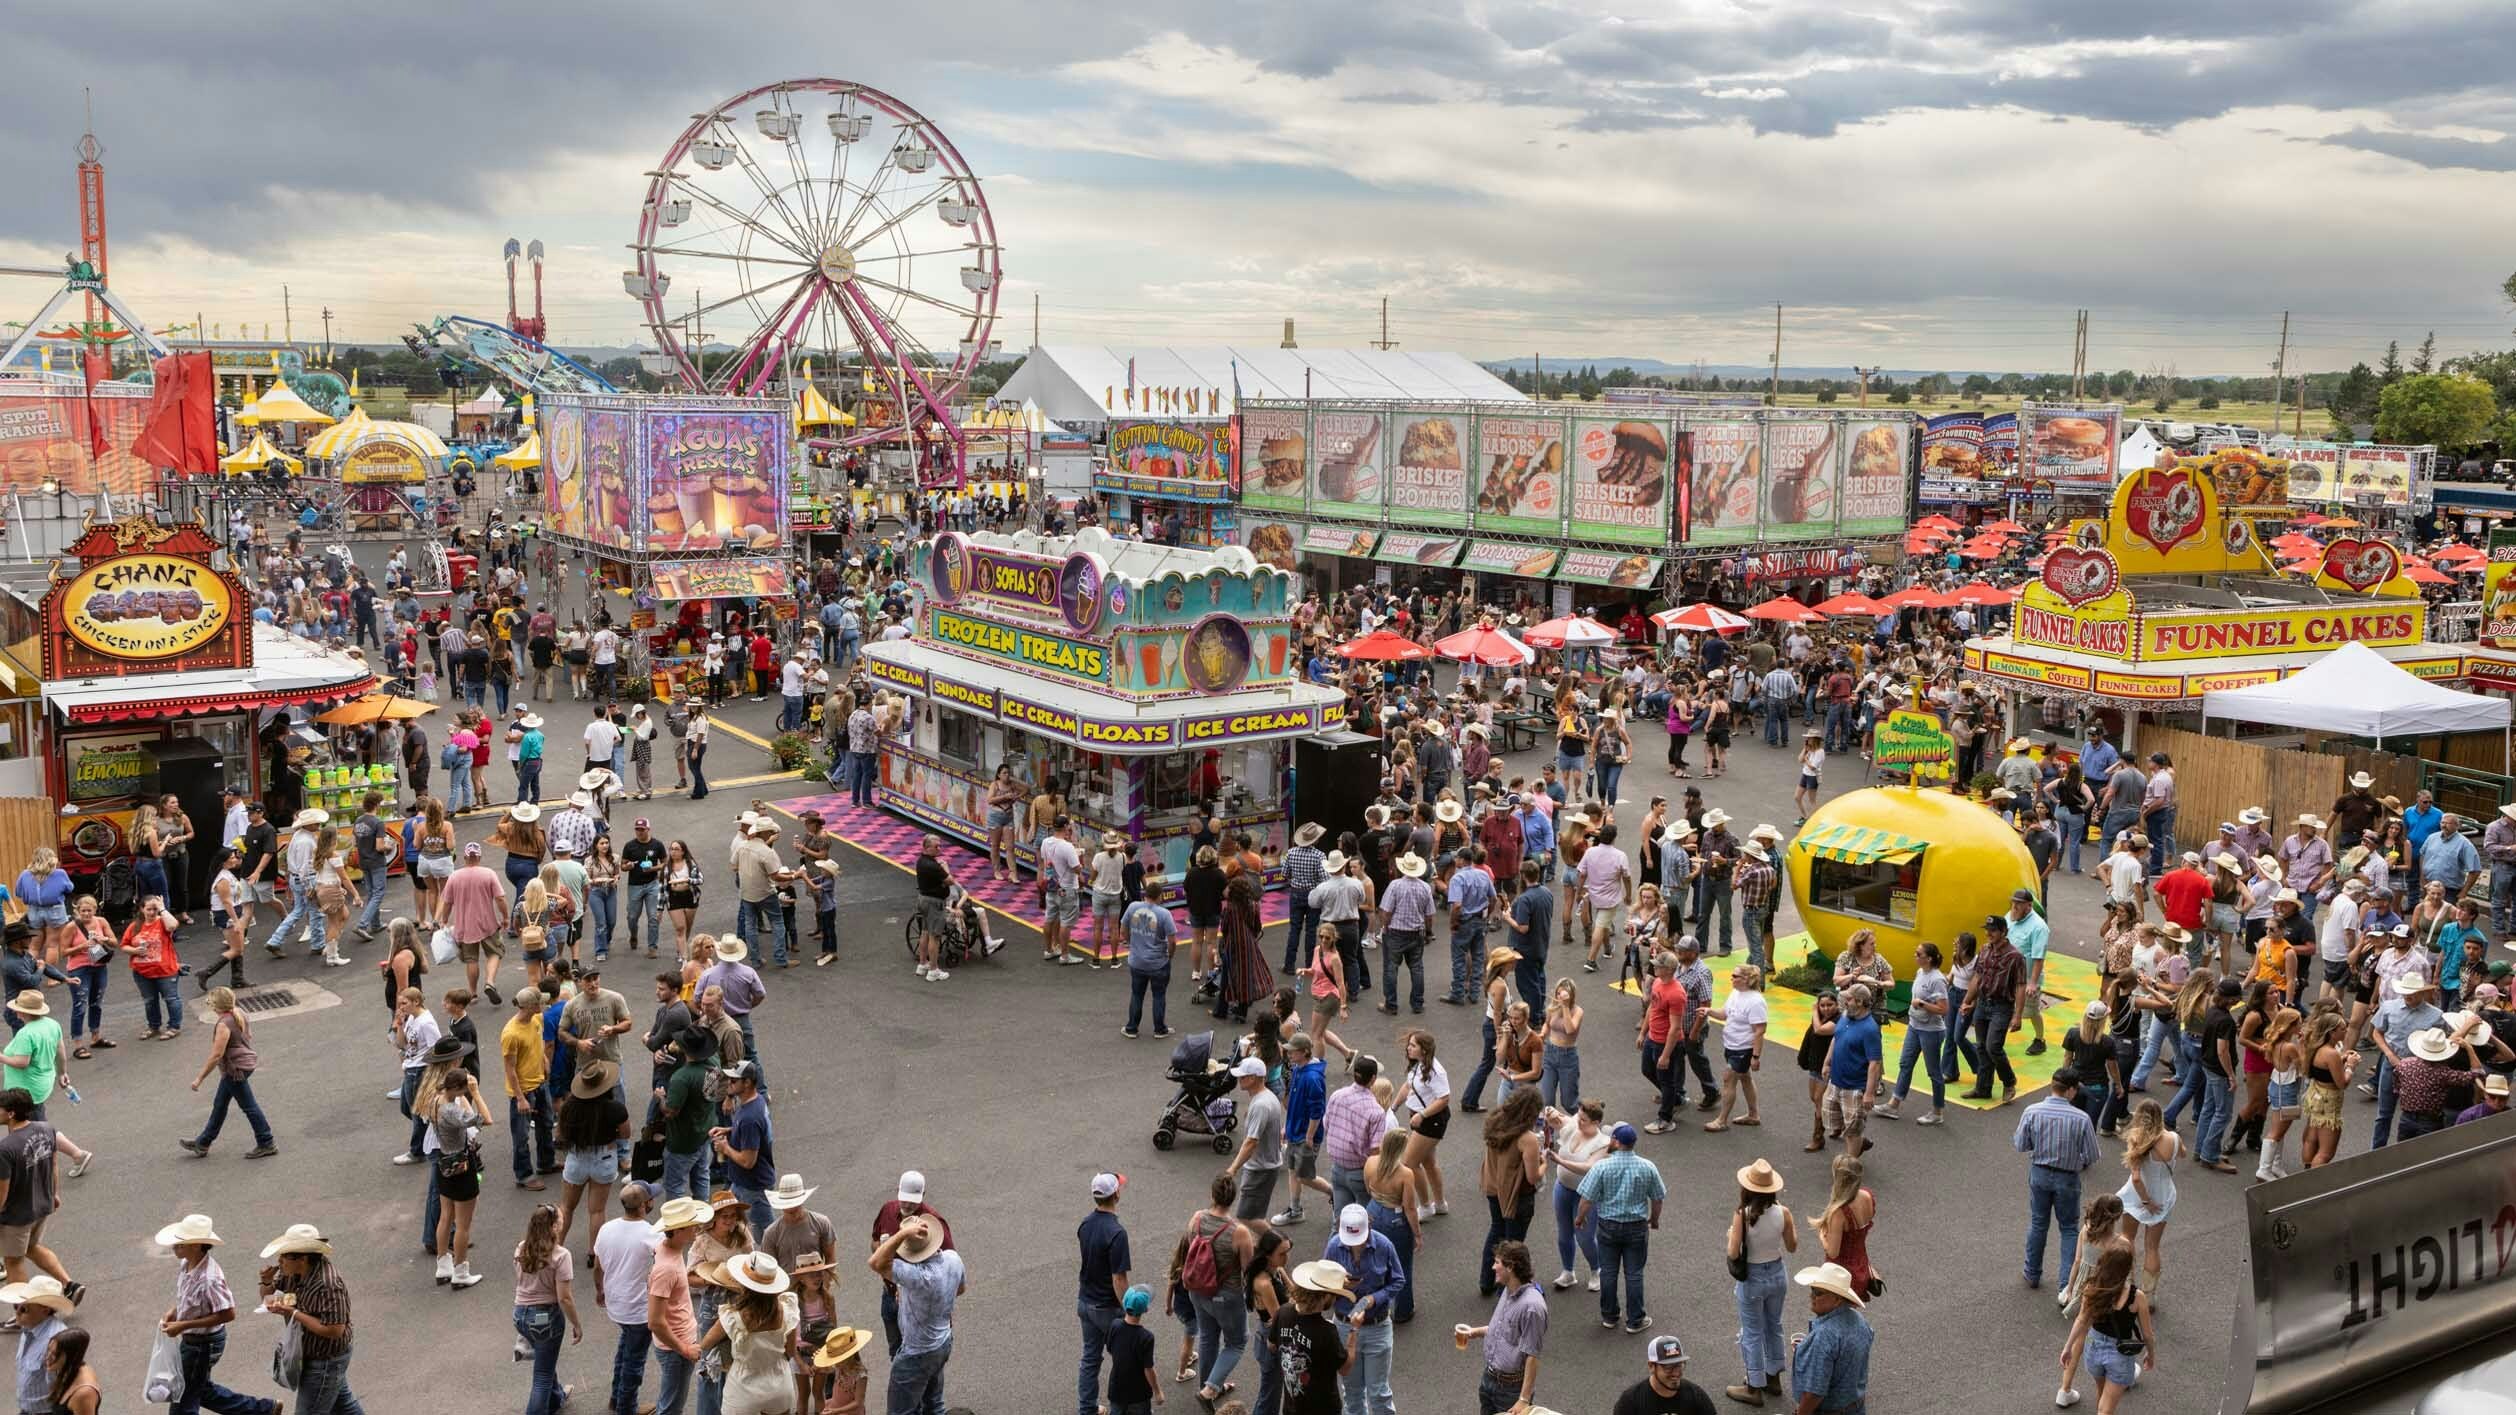 The Midway and Food Court at Cheyenne Frontier Days on July 23, 2023.